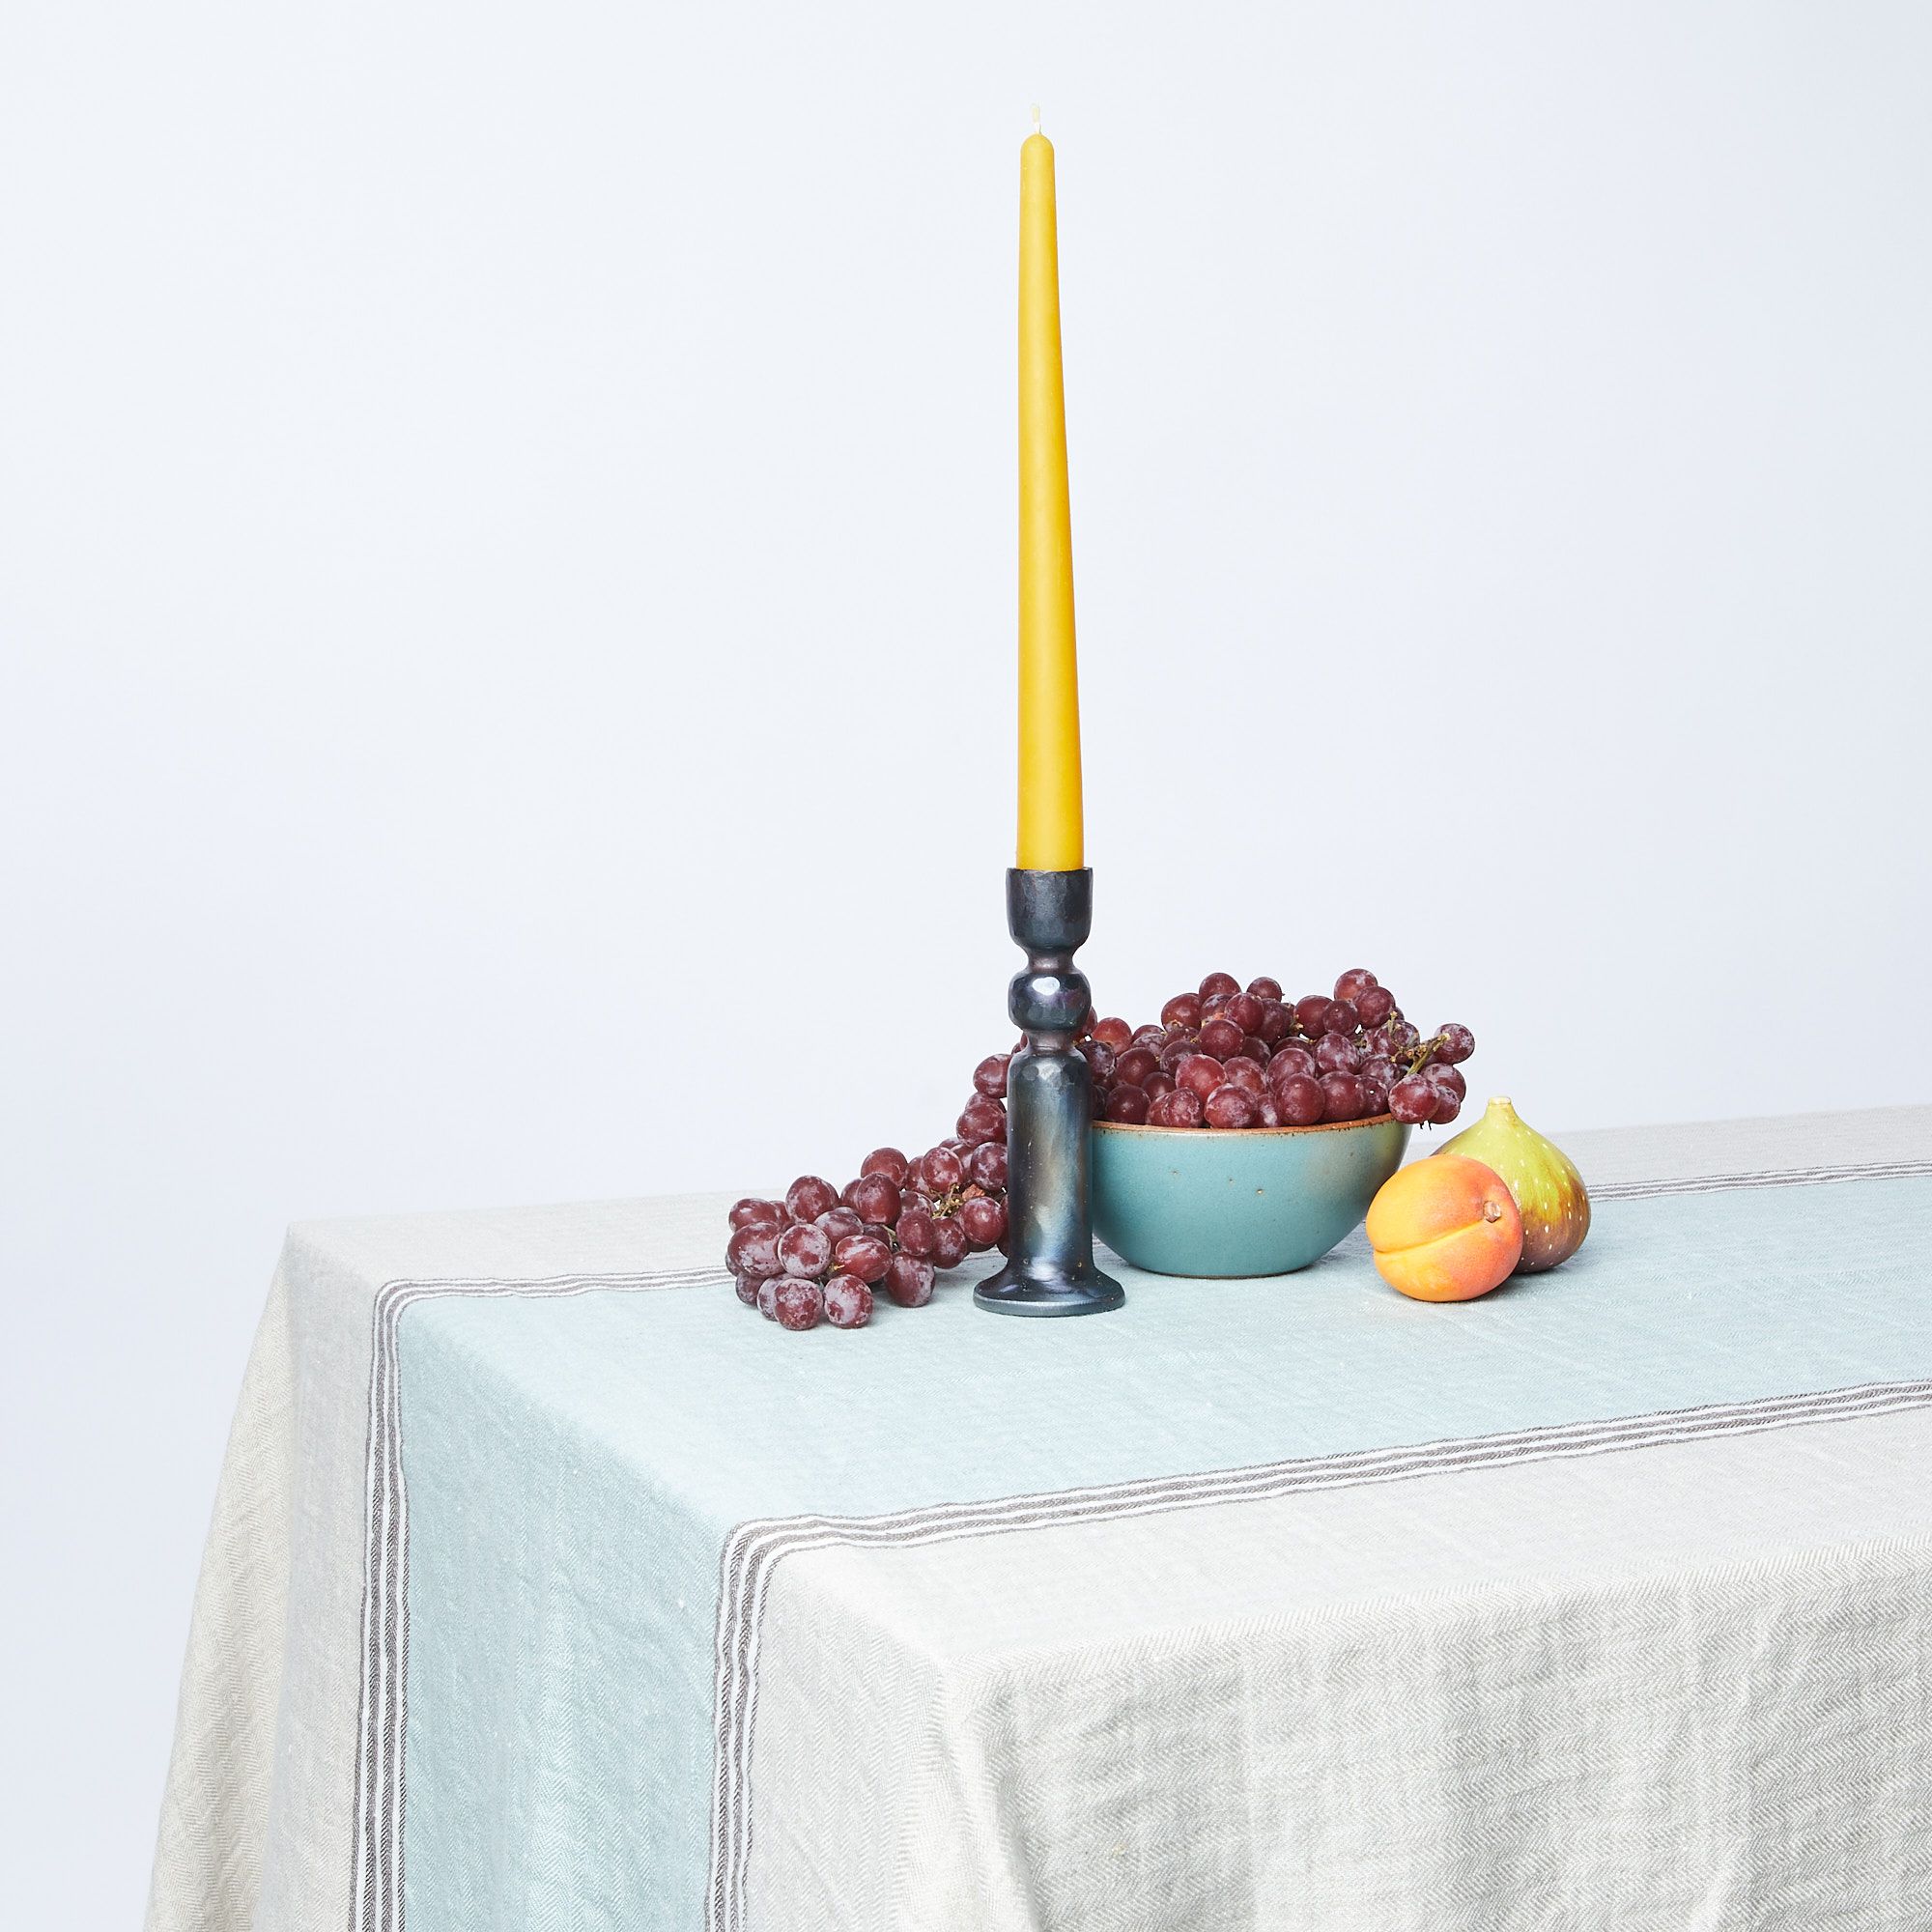 White linen tablecloth with aqua stripe down the middle draped over table with candlestick and fruit bowl on top